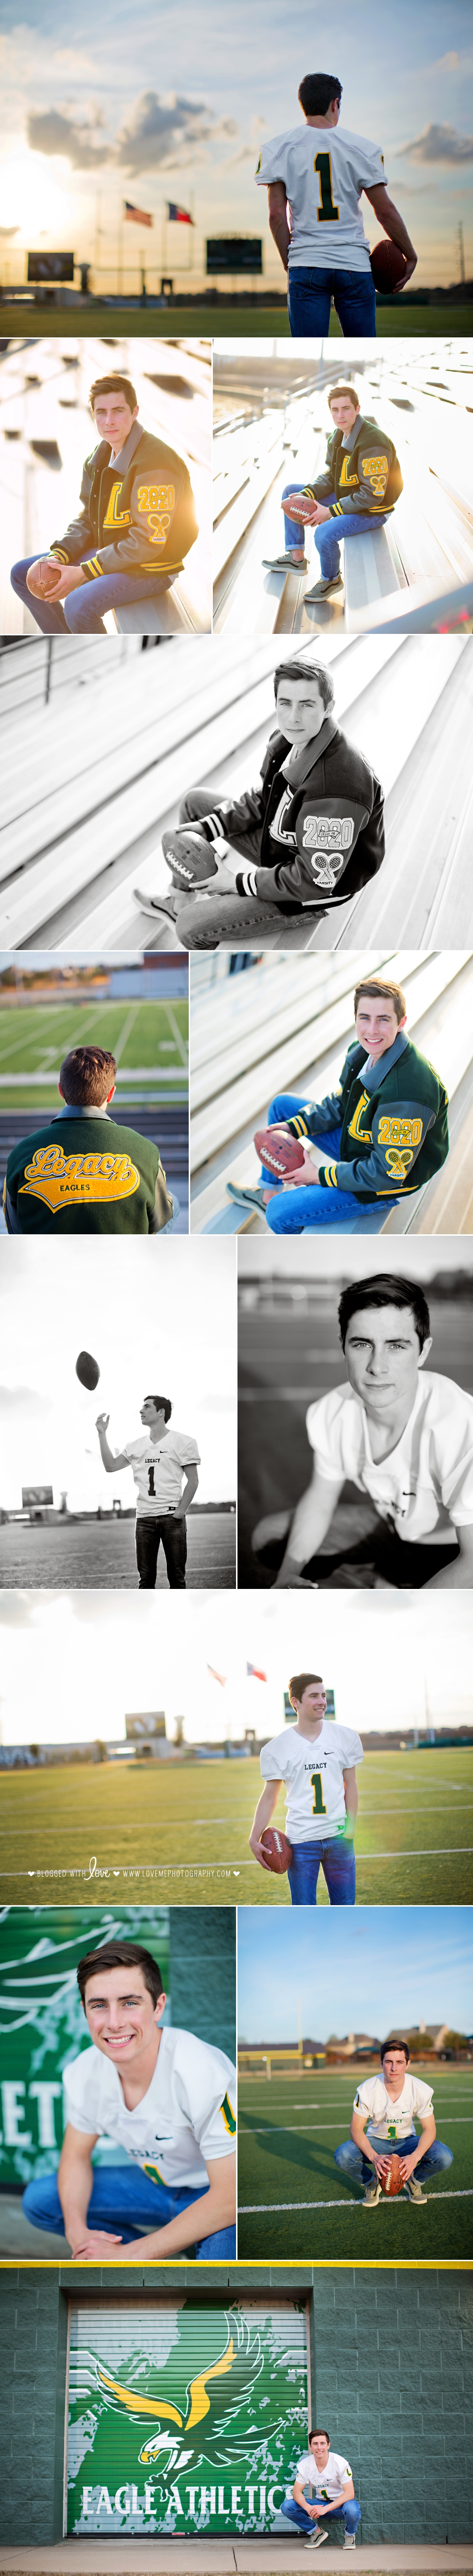 Collage of guy at a football field